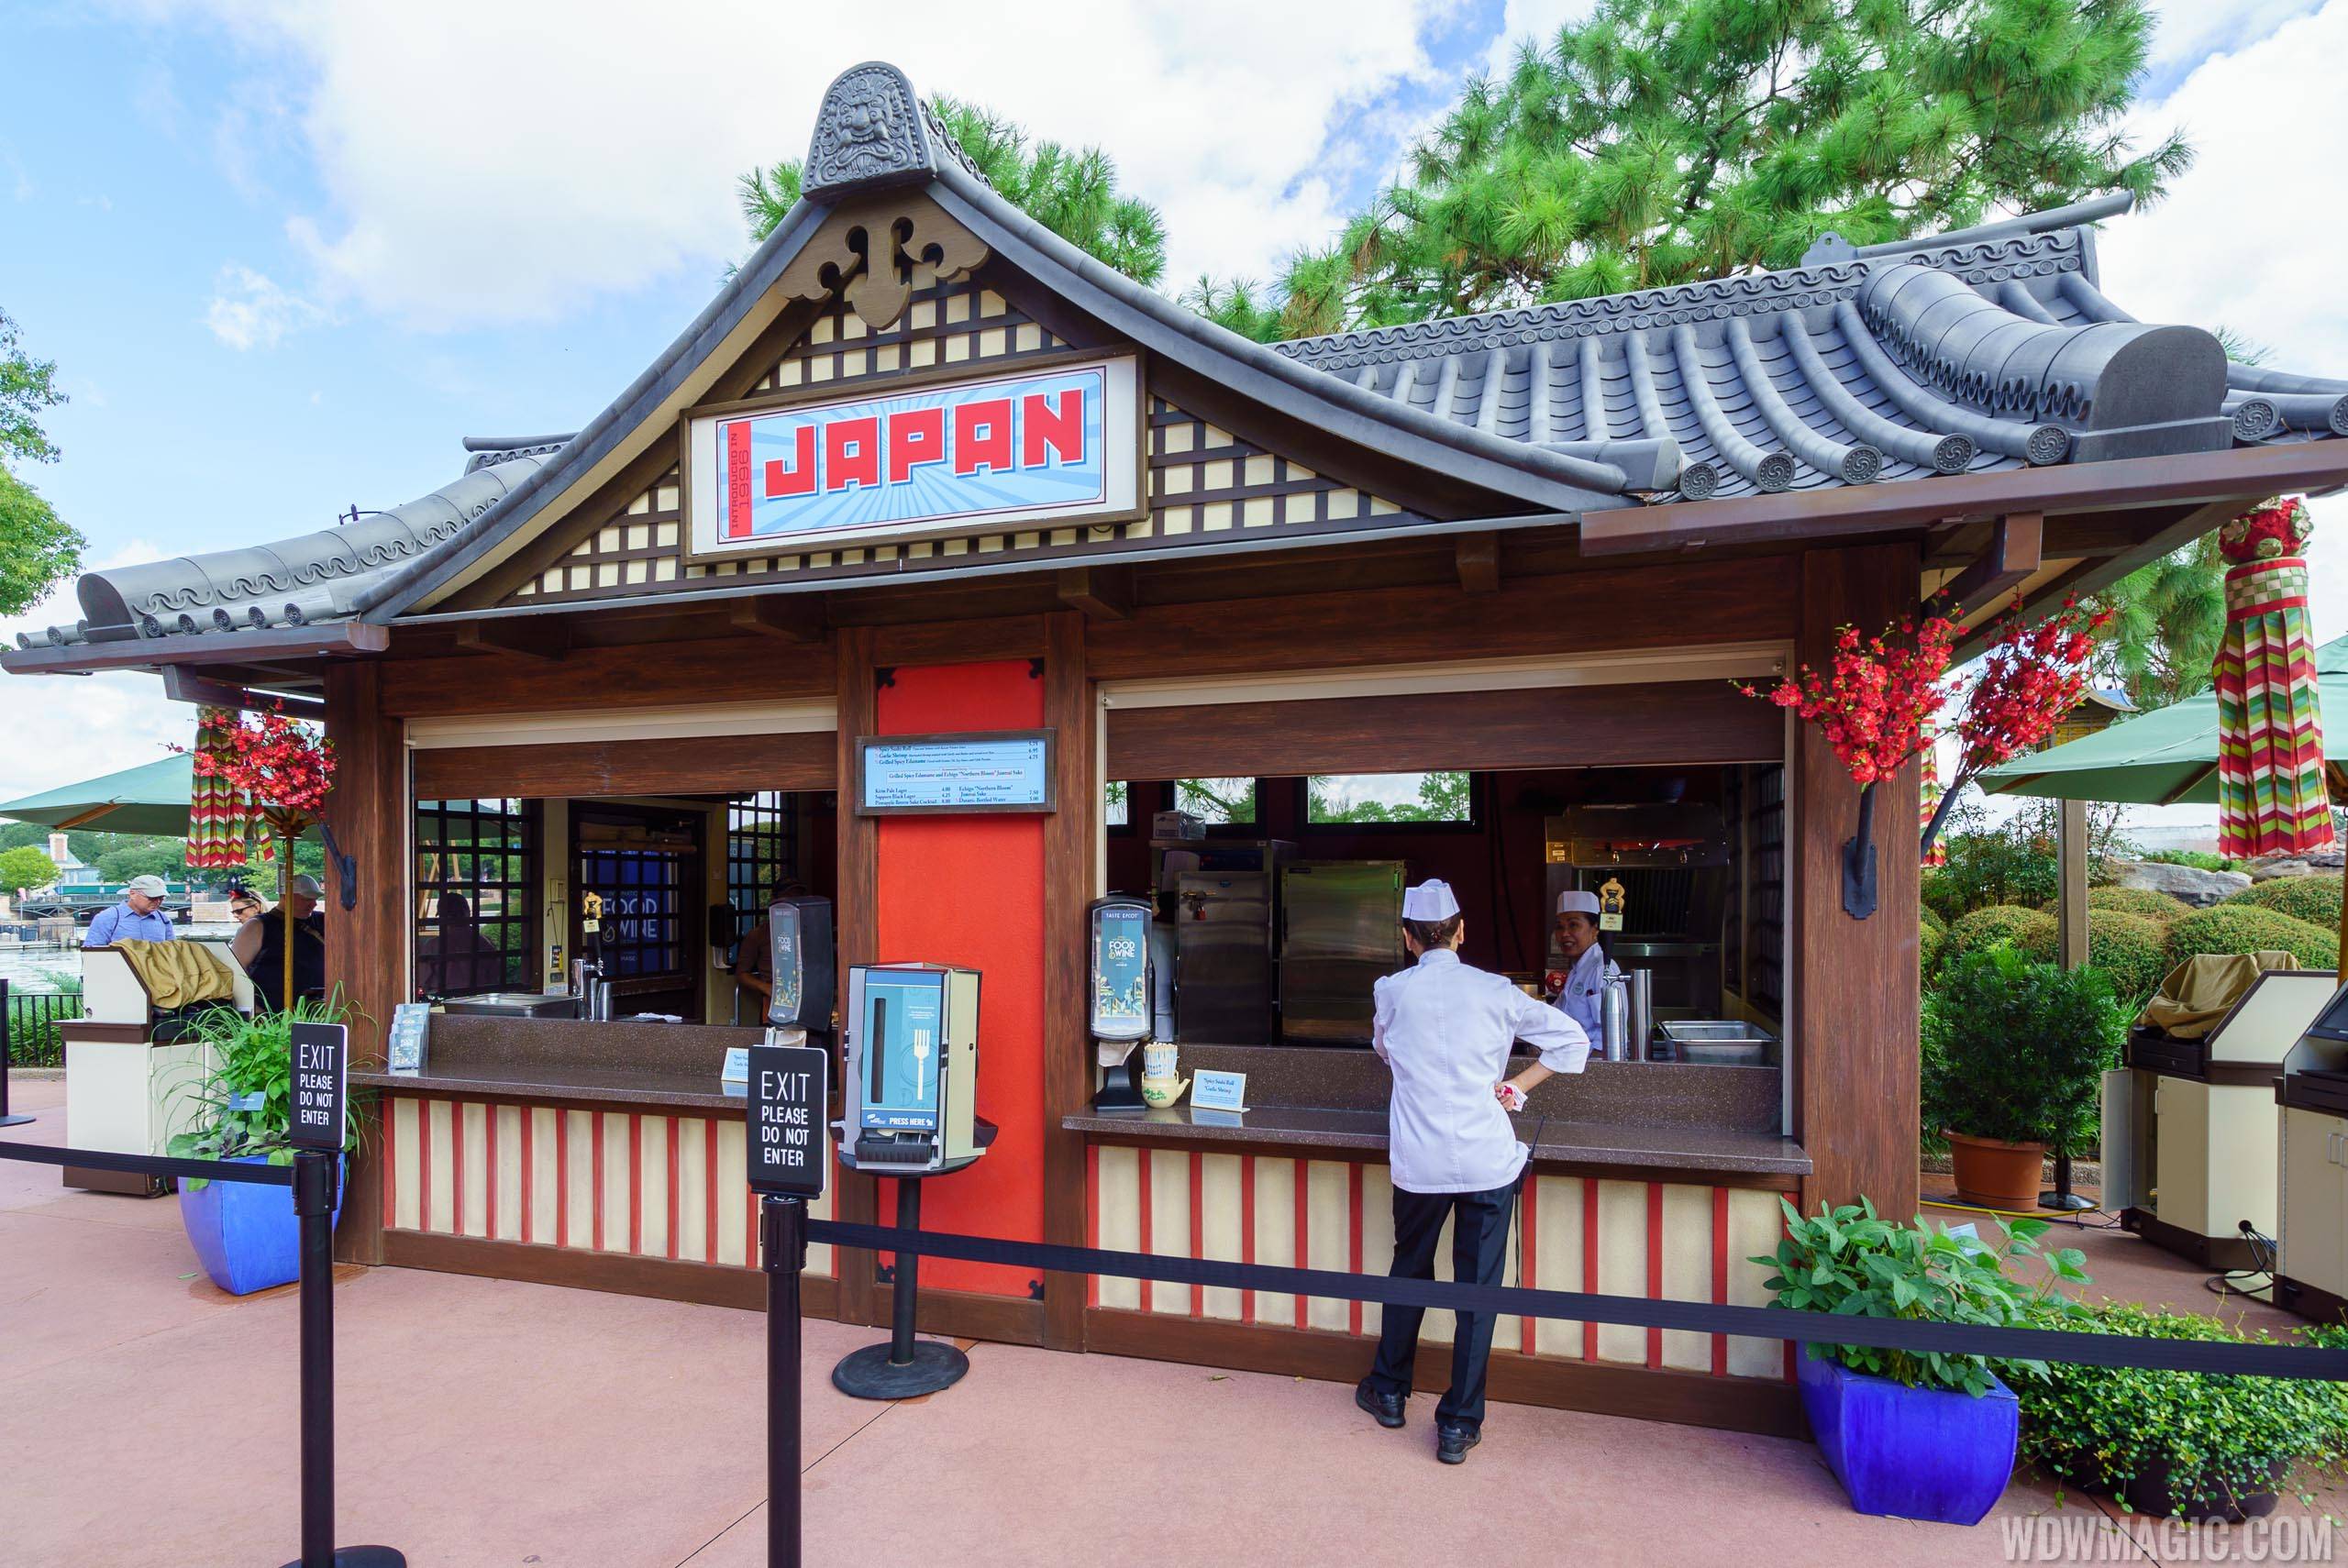 Food and Wine Marketplace kiosk at the Japan Pavilion